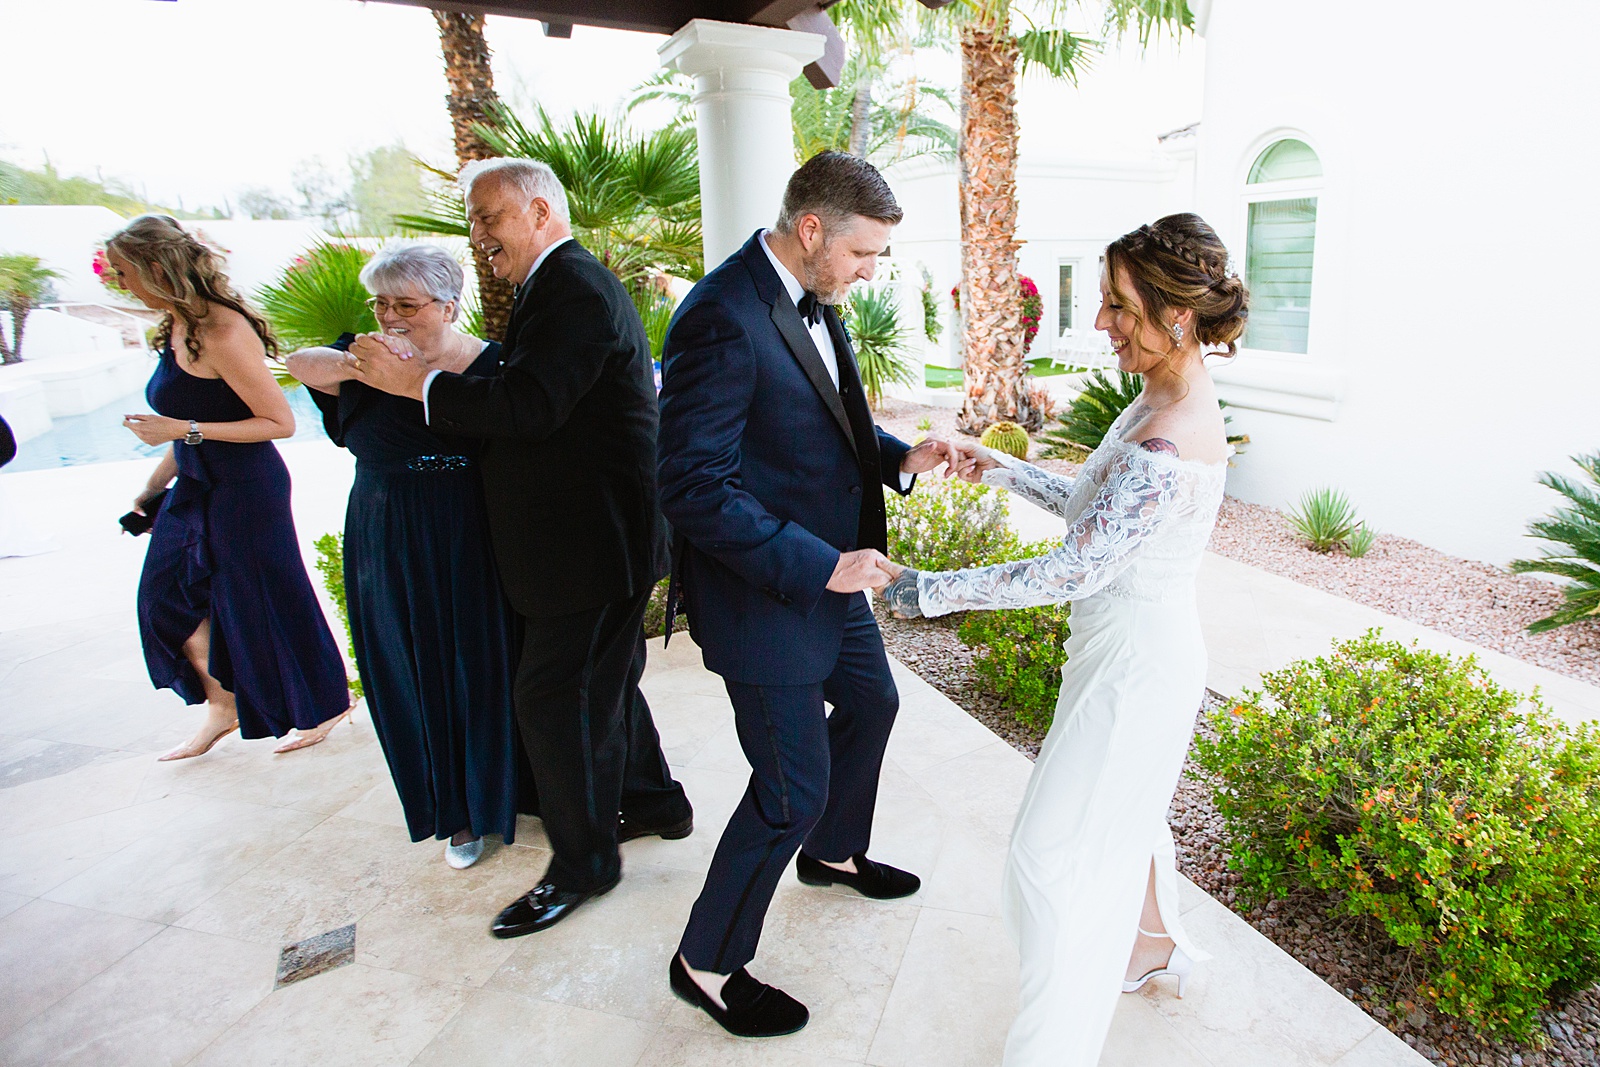 Newlyweds and guests dancing together at backyard wedding reception by Scottsdale wedding photographer PMA Photography